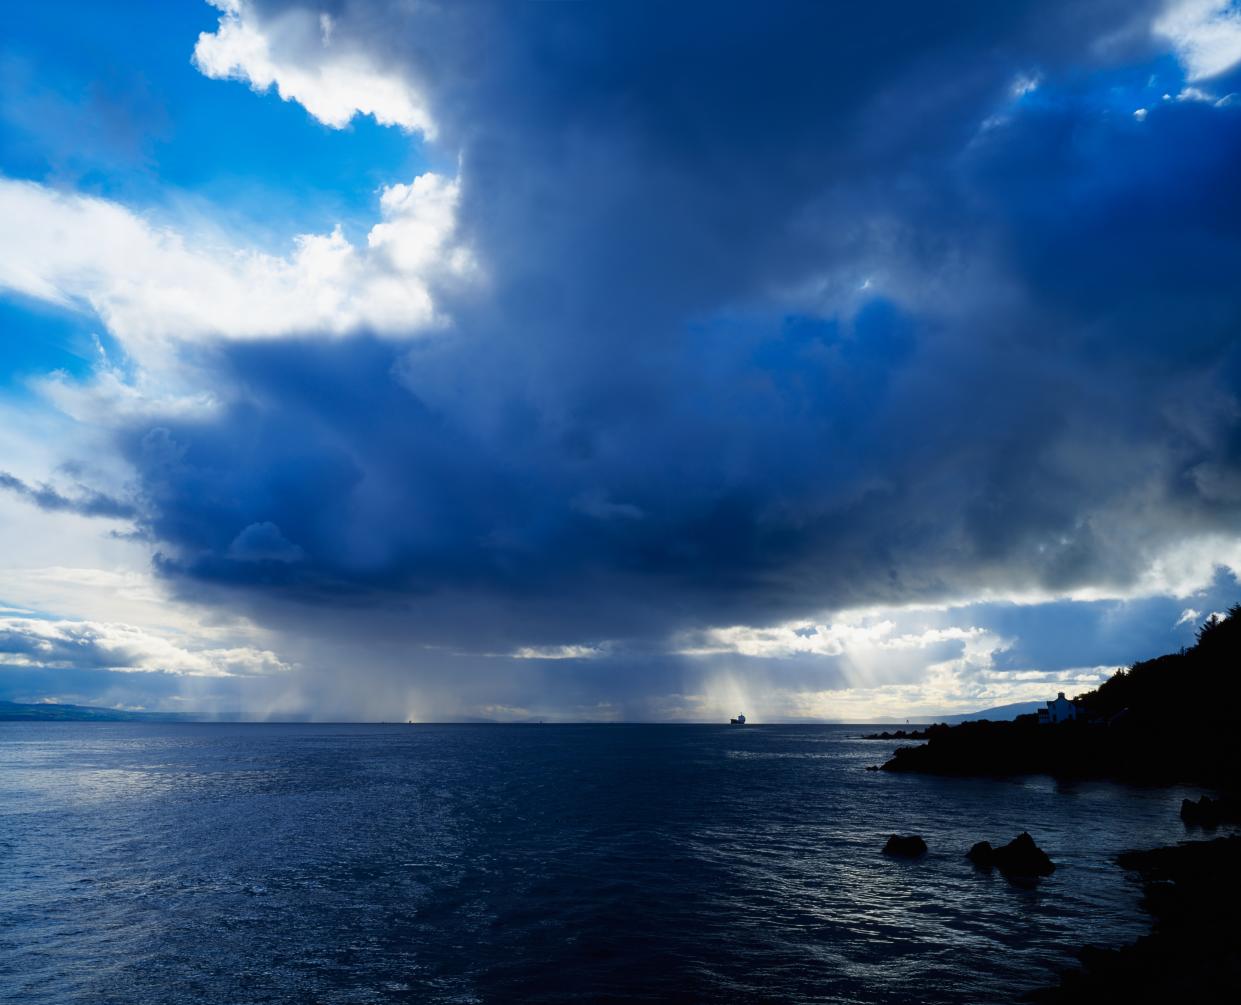 Rain shower over Lough Foyle from Greencastle, Co Donegal, Ireland